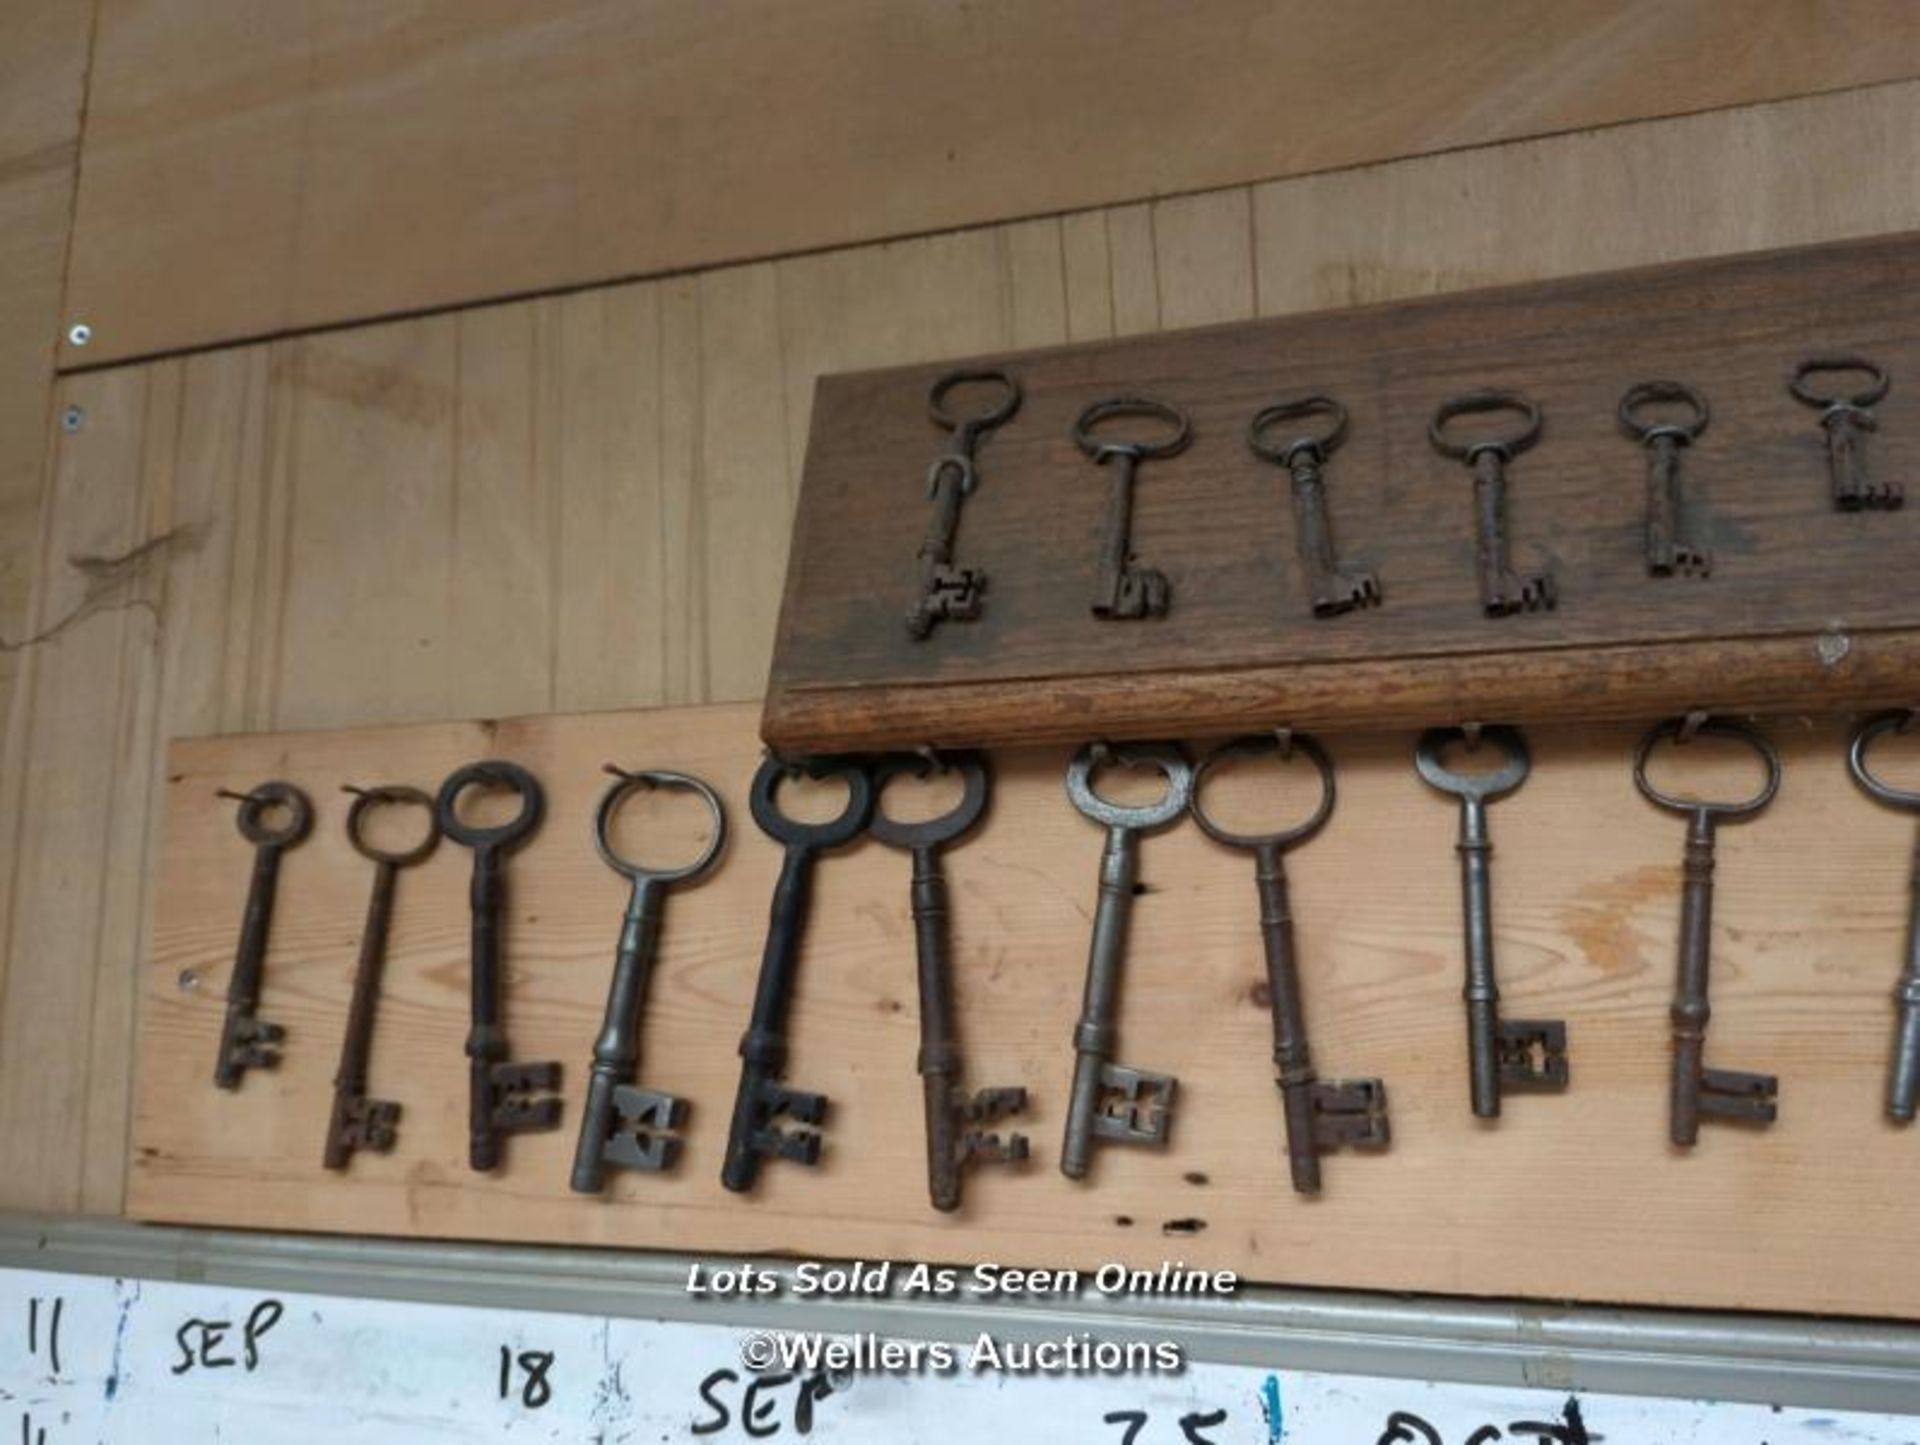 2 decorative boards with old keys hanging on them - Image 3 of 5